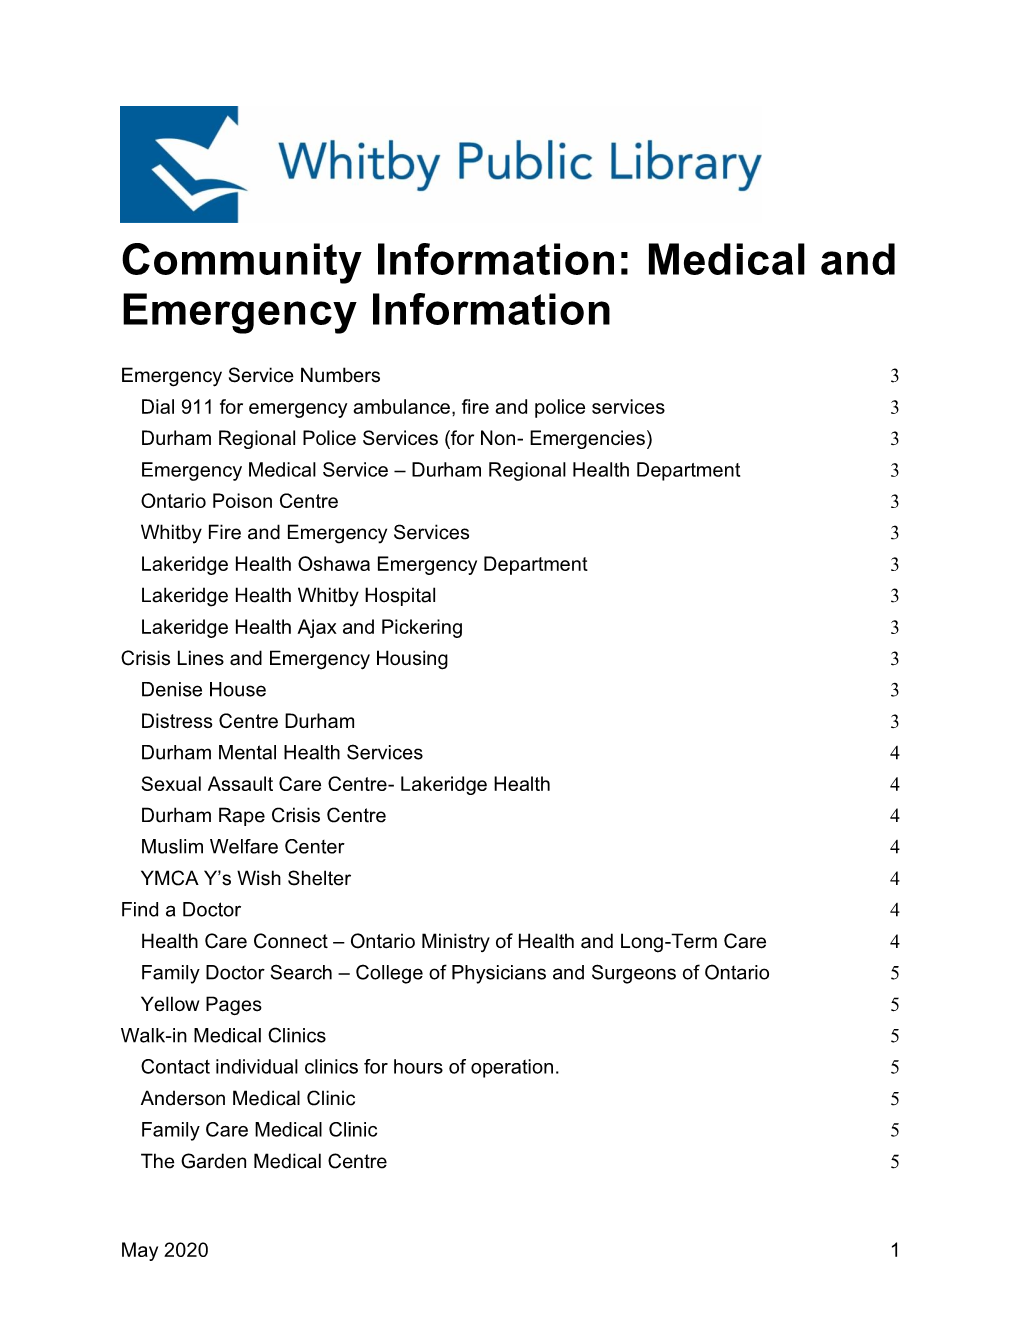 Medical and Emergency Information